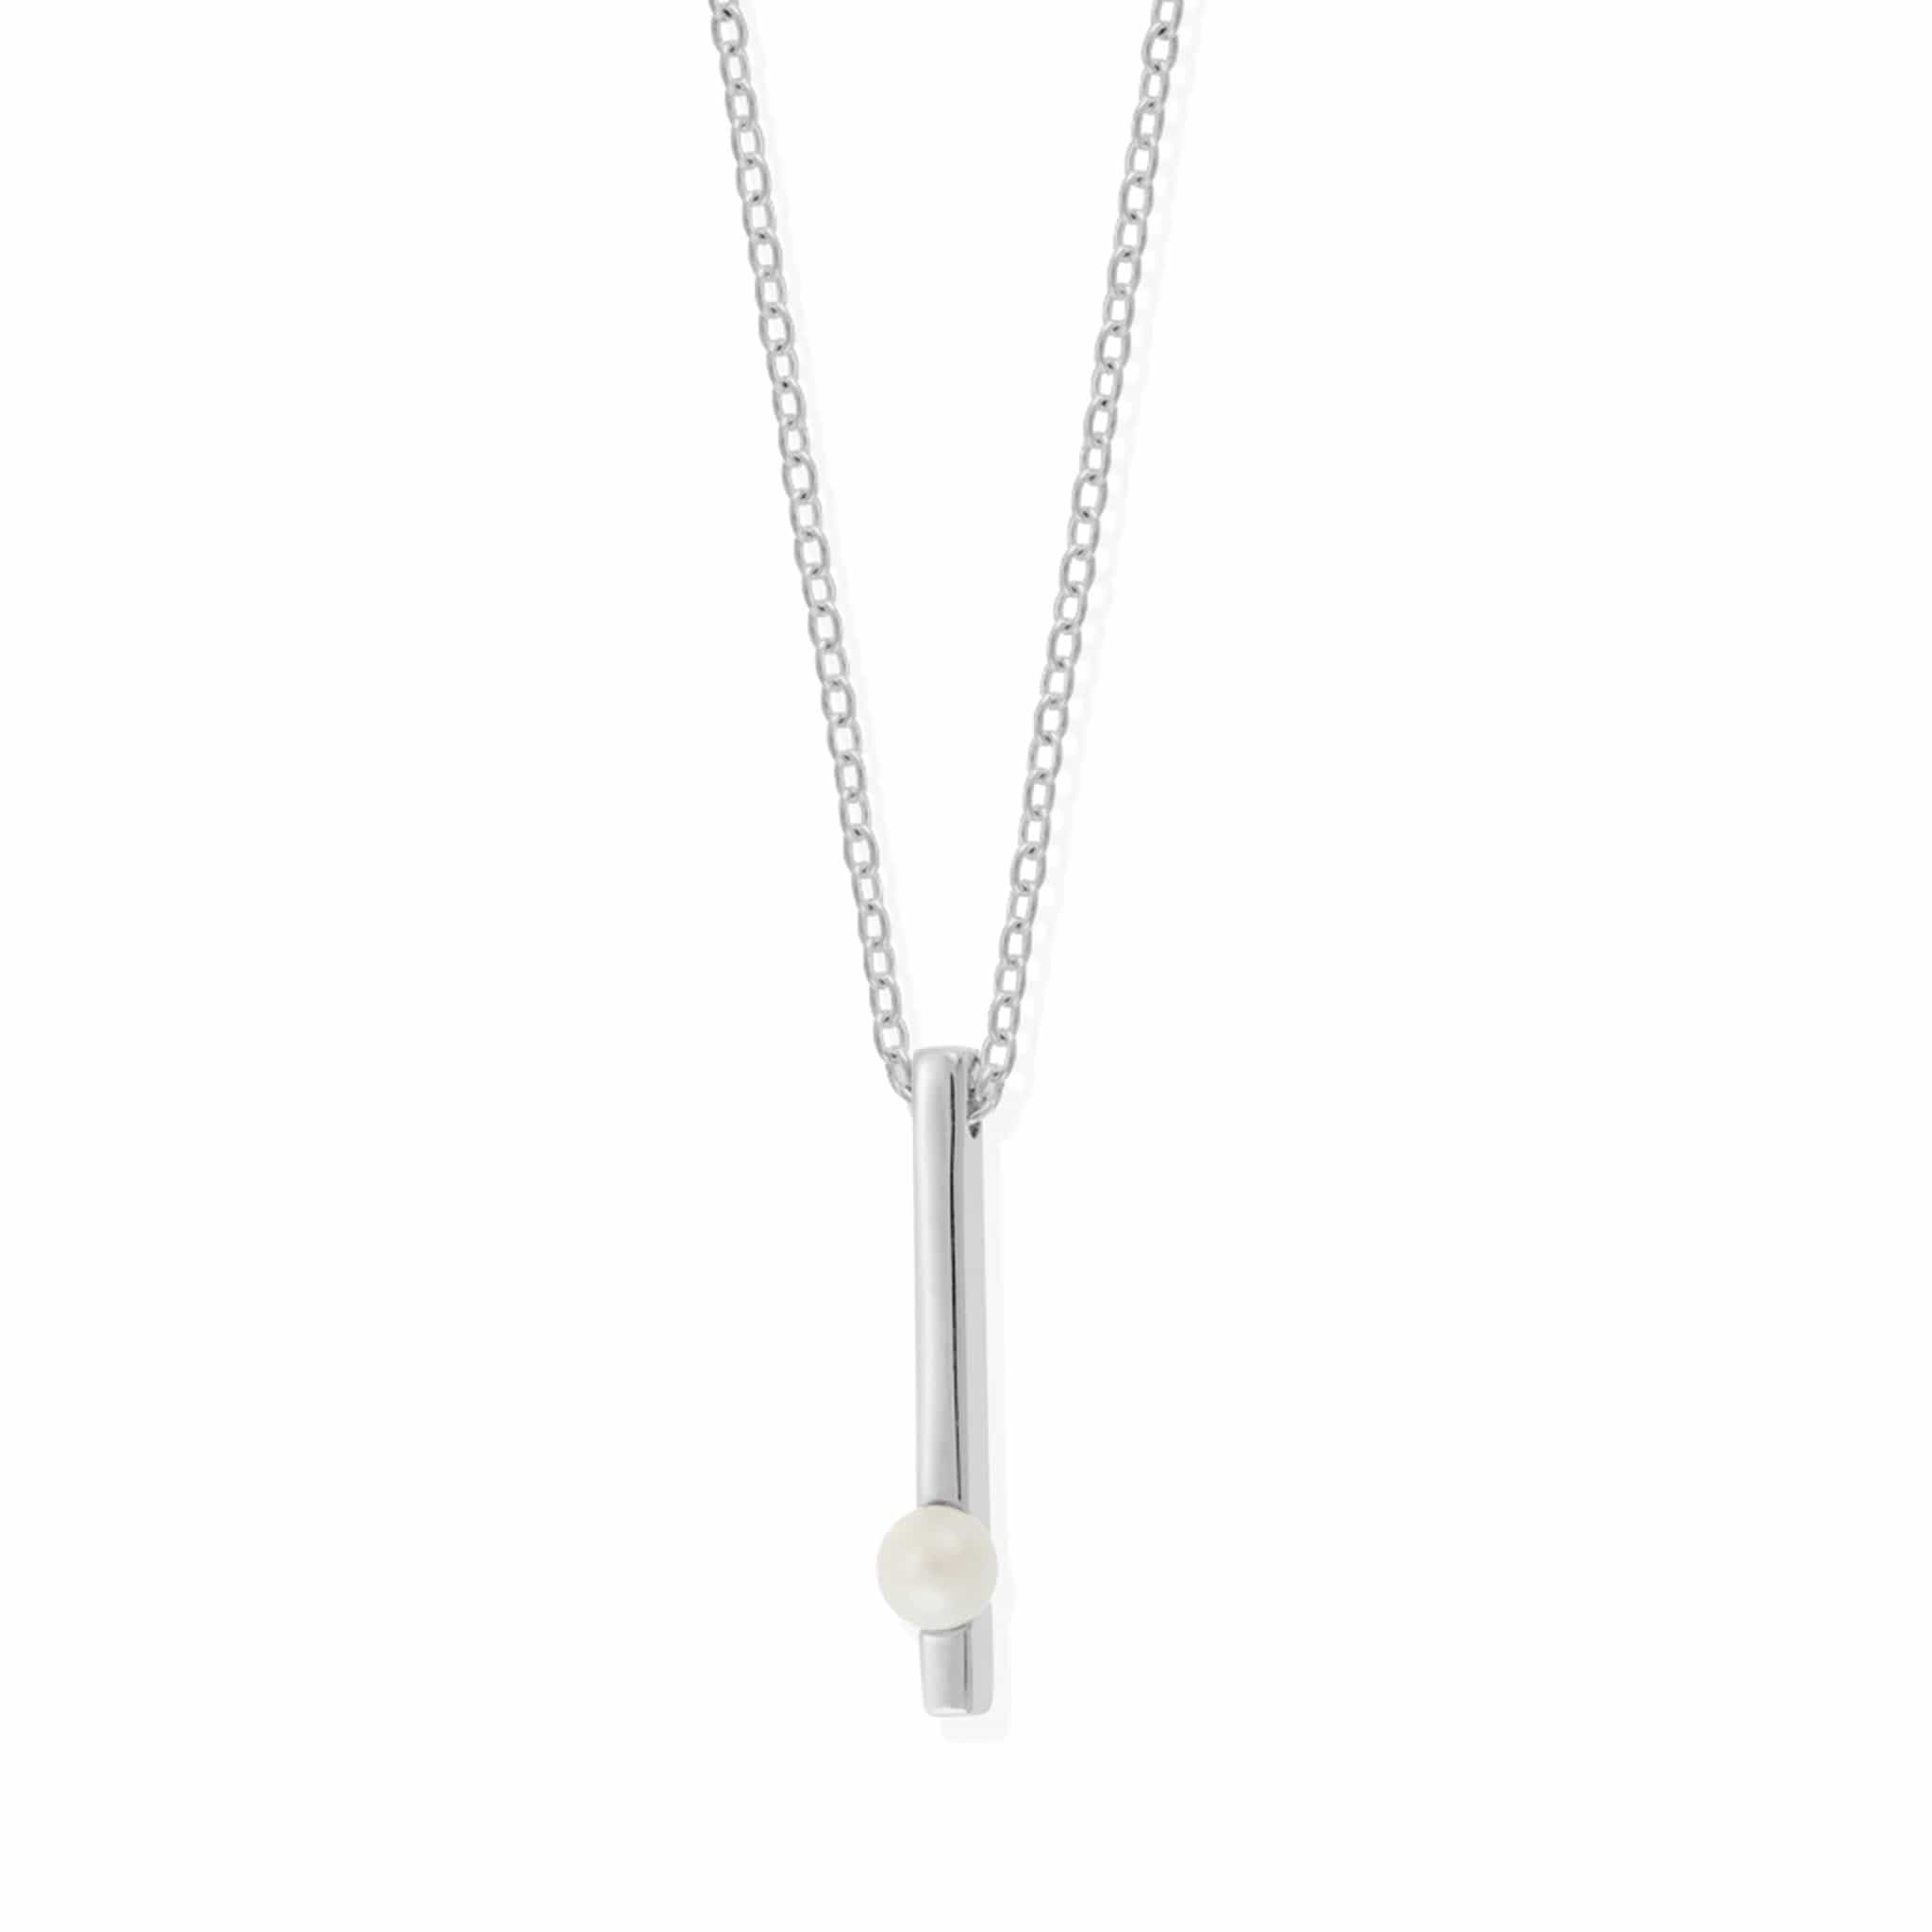 Boma Jewelry Necklaces Pearl Belle Pearl Long Bar Necklace